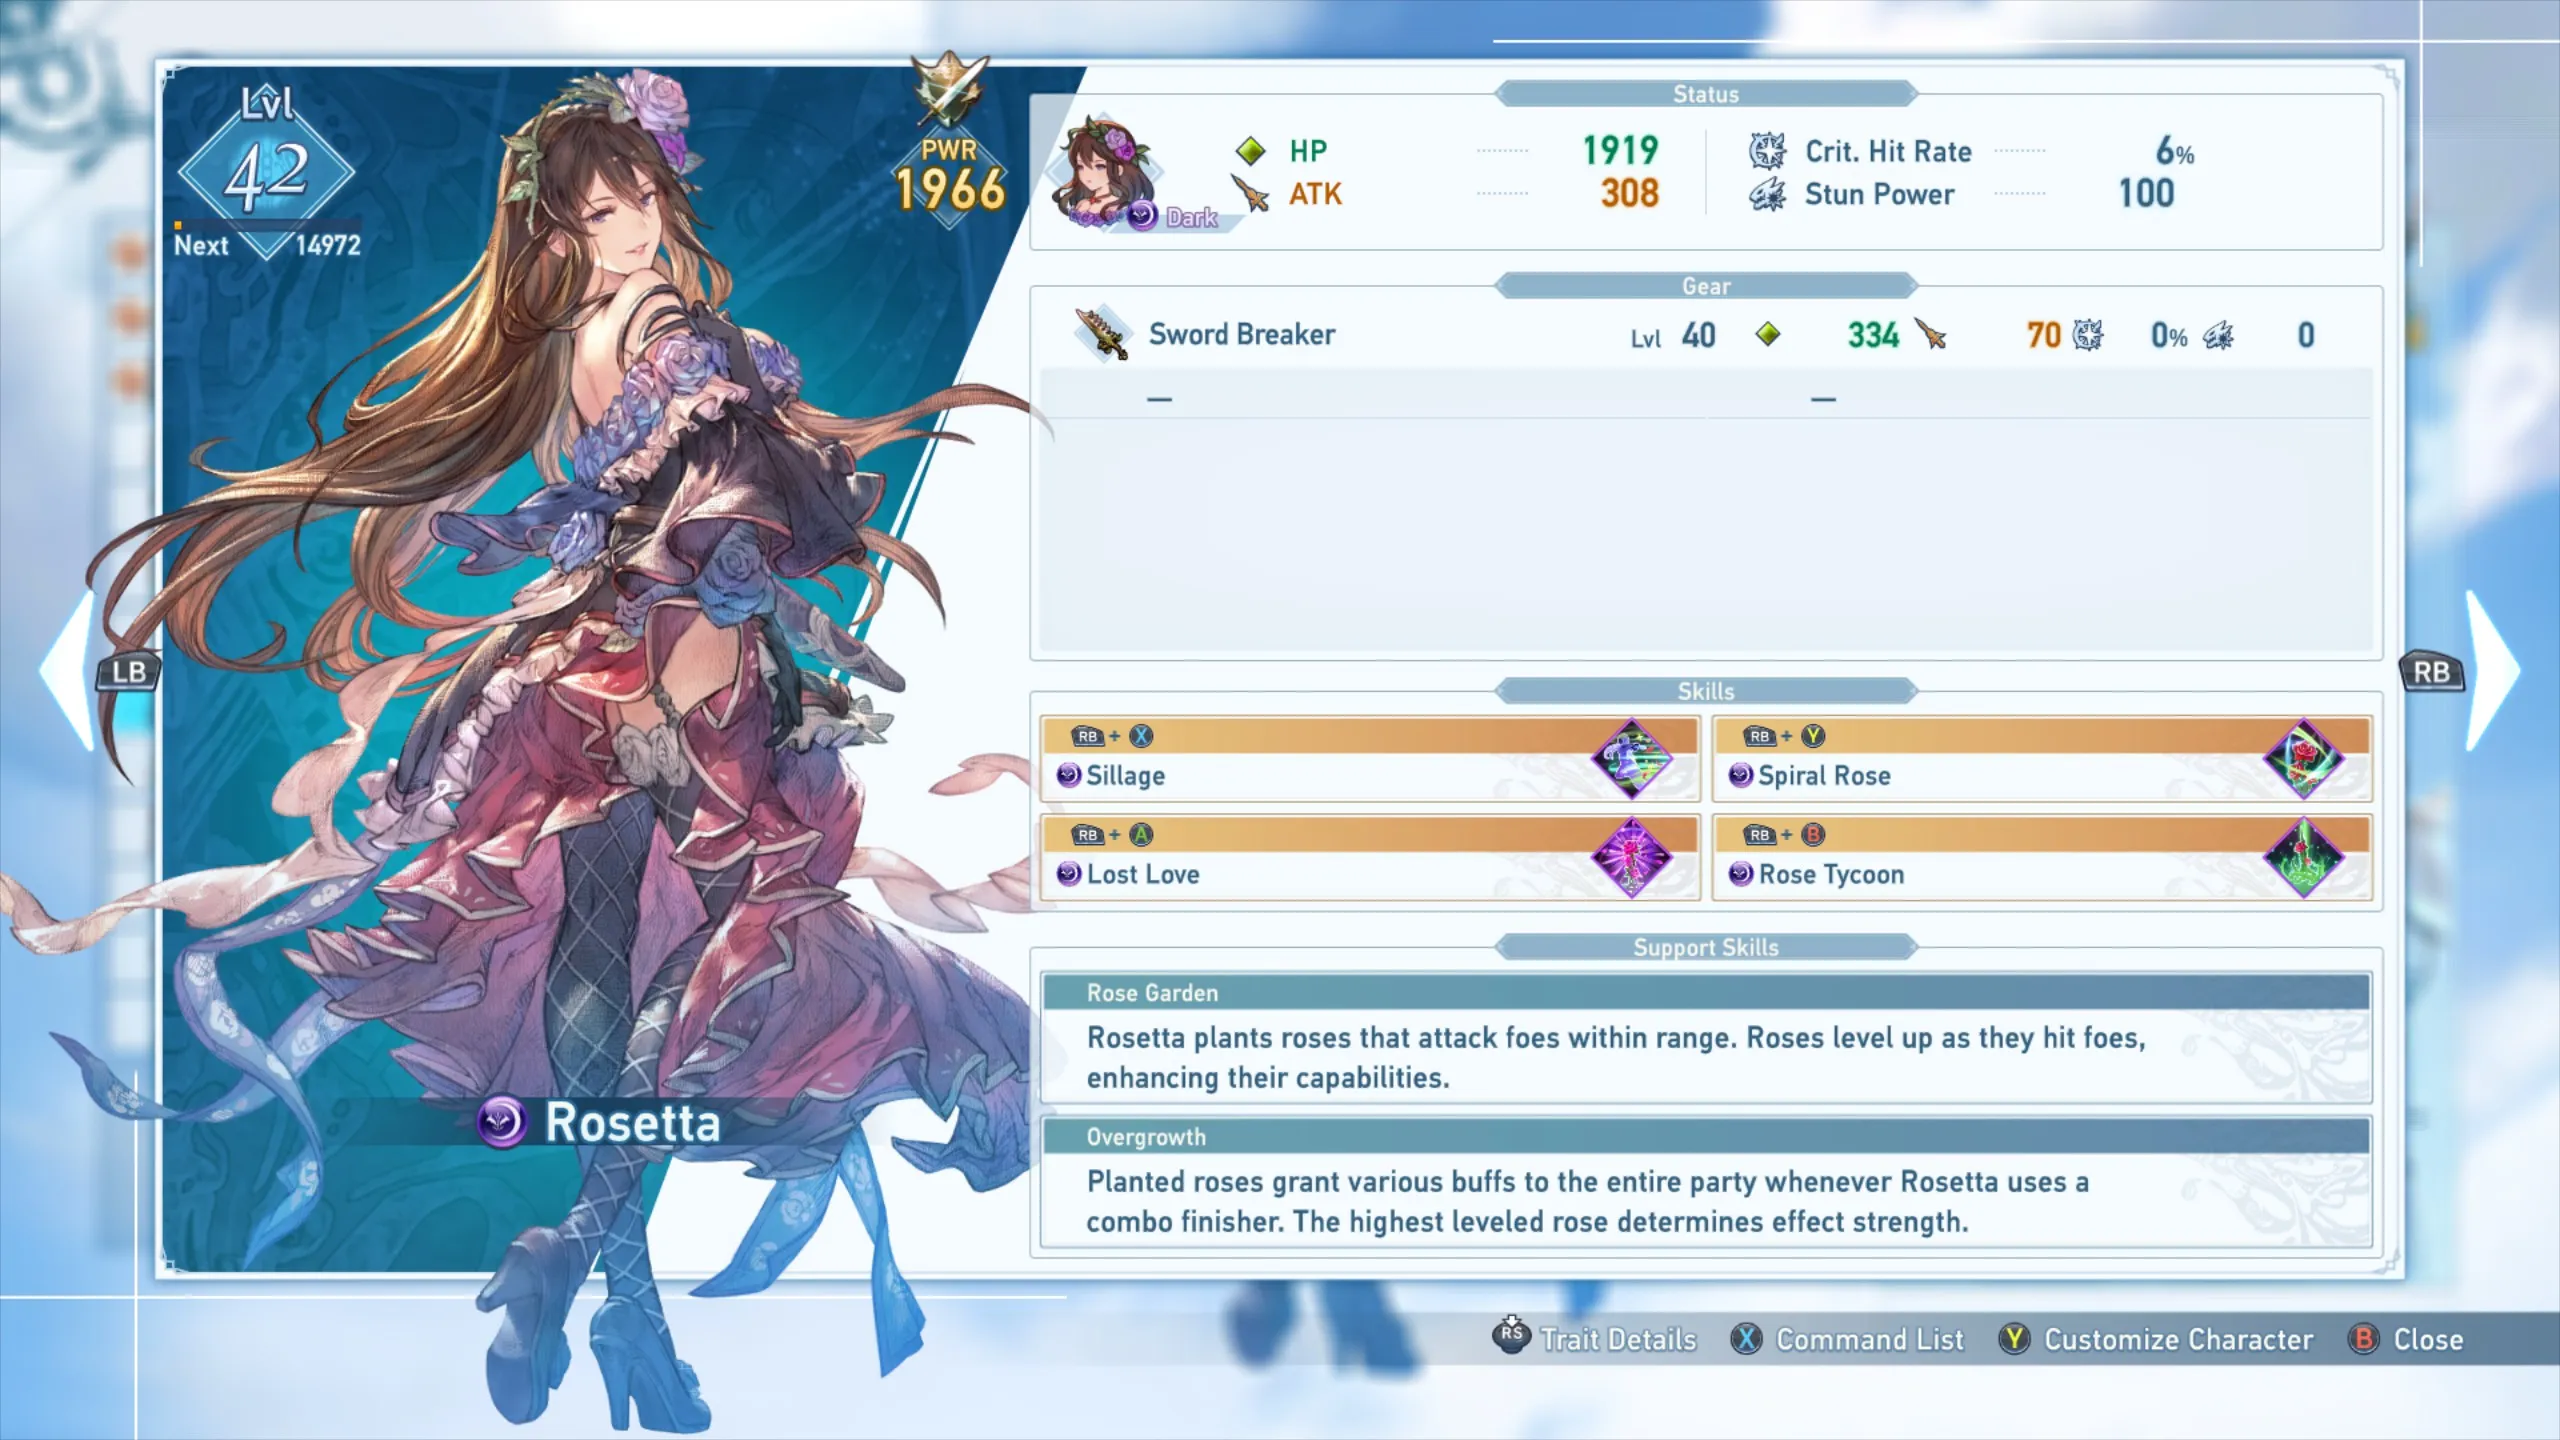 An image showcasing Rosetta's stats in Granblue Fantasy Relink.